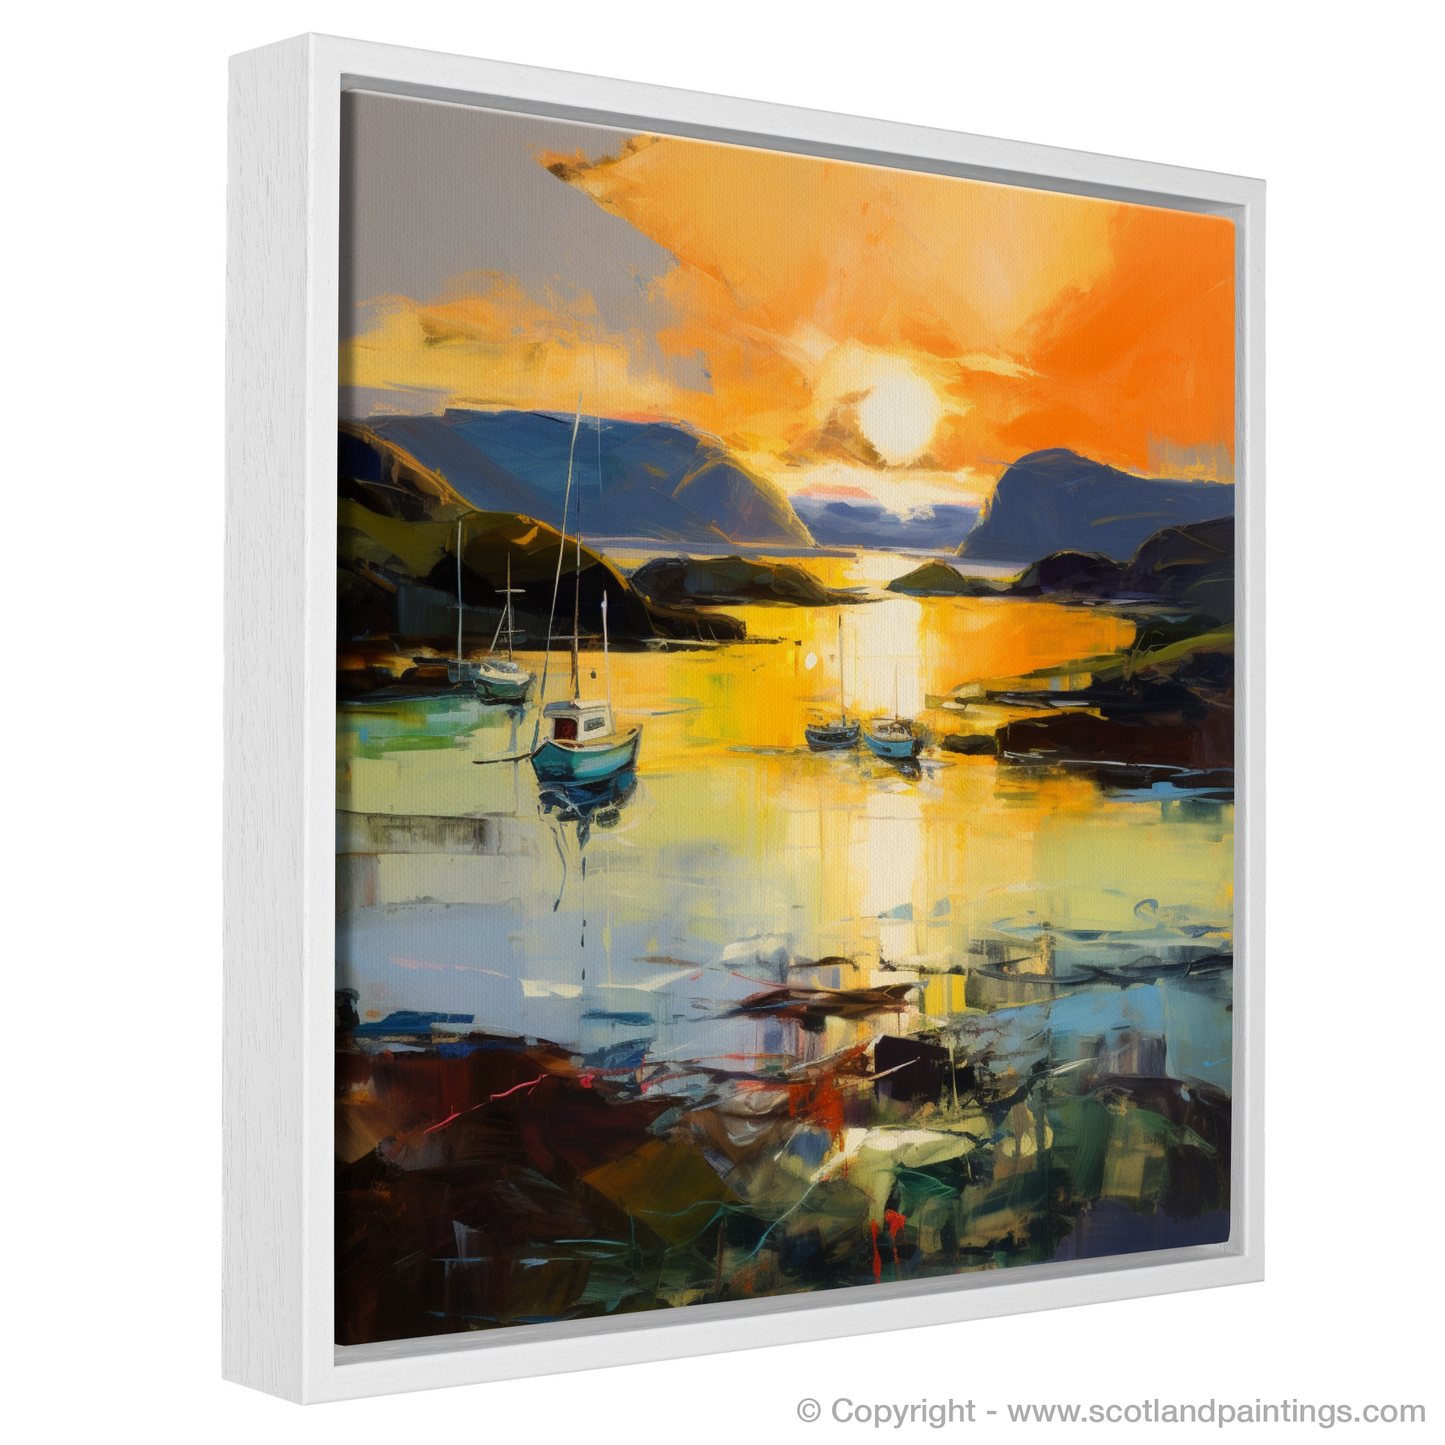 Isleornsay Harbour Sunset: An Abstract Expressionist Odyssey